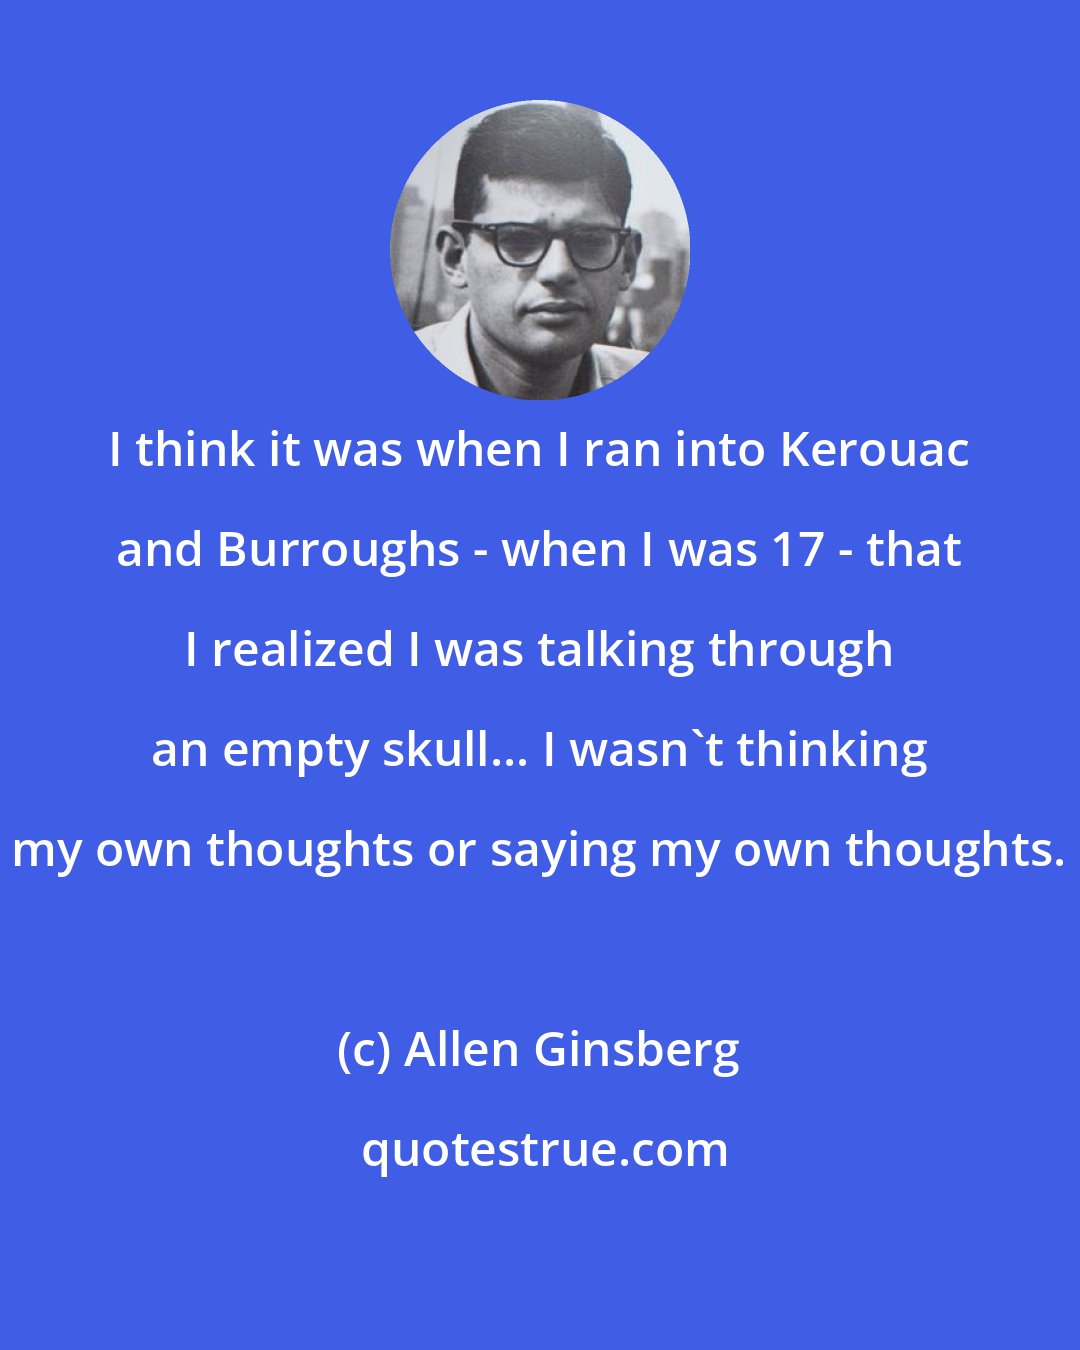 Allen Ginsberg: I think it was when I ran into Kerouac and Burroughs - when I was 17 - that I realized I was talking through an empty skull... I wasn't thinking my own thoughts or saying my own thoughts.